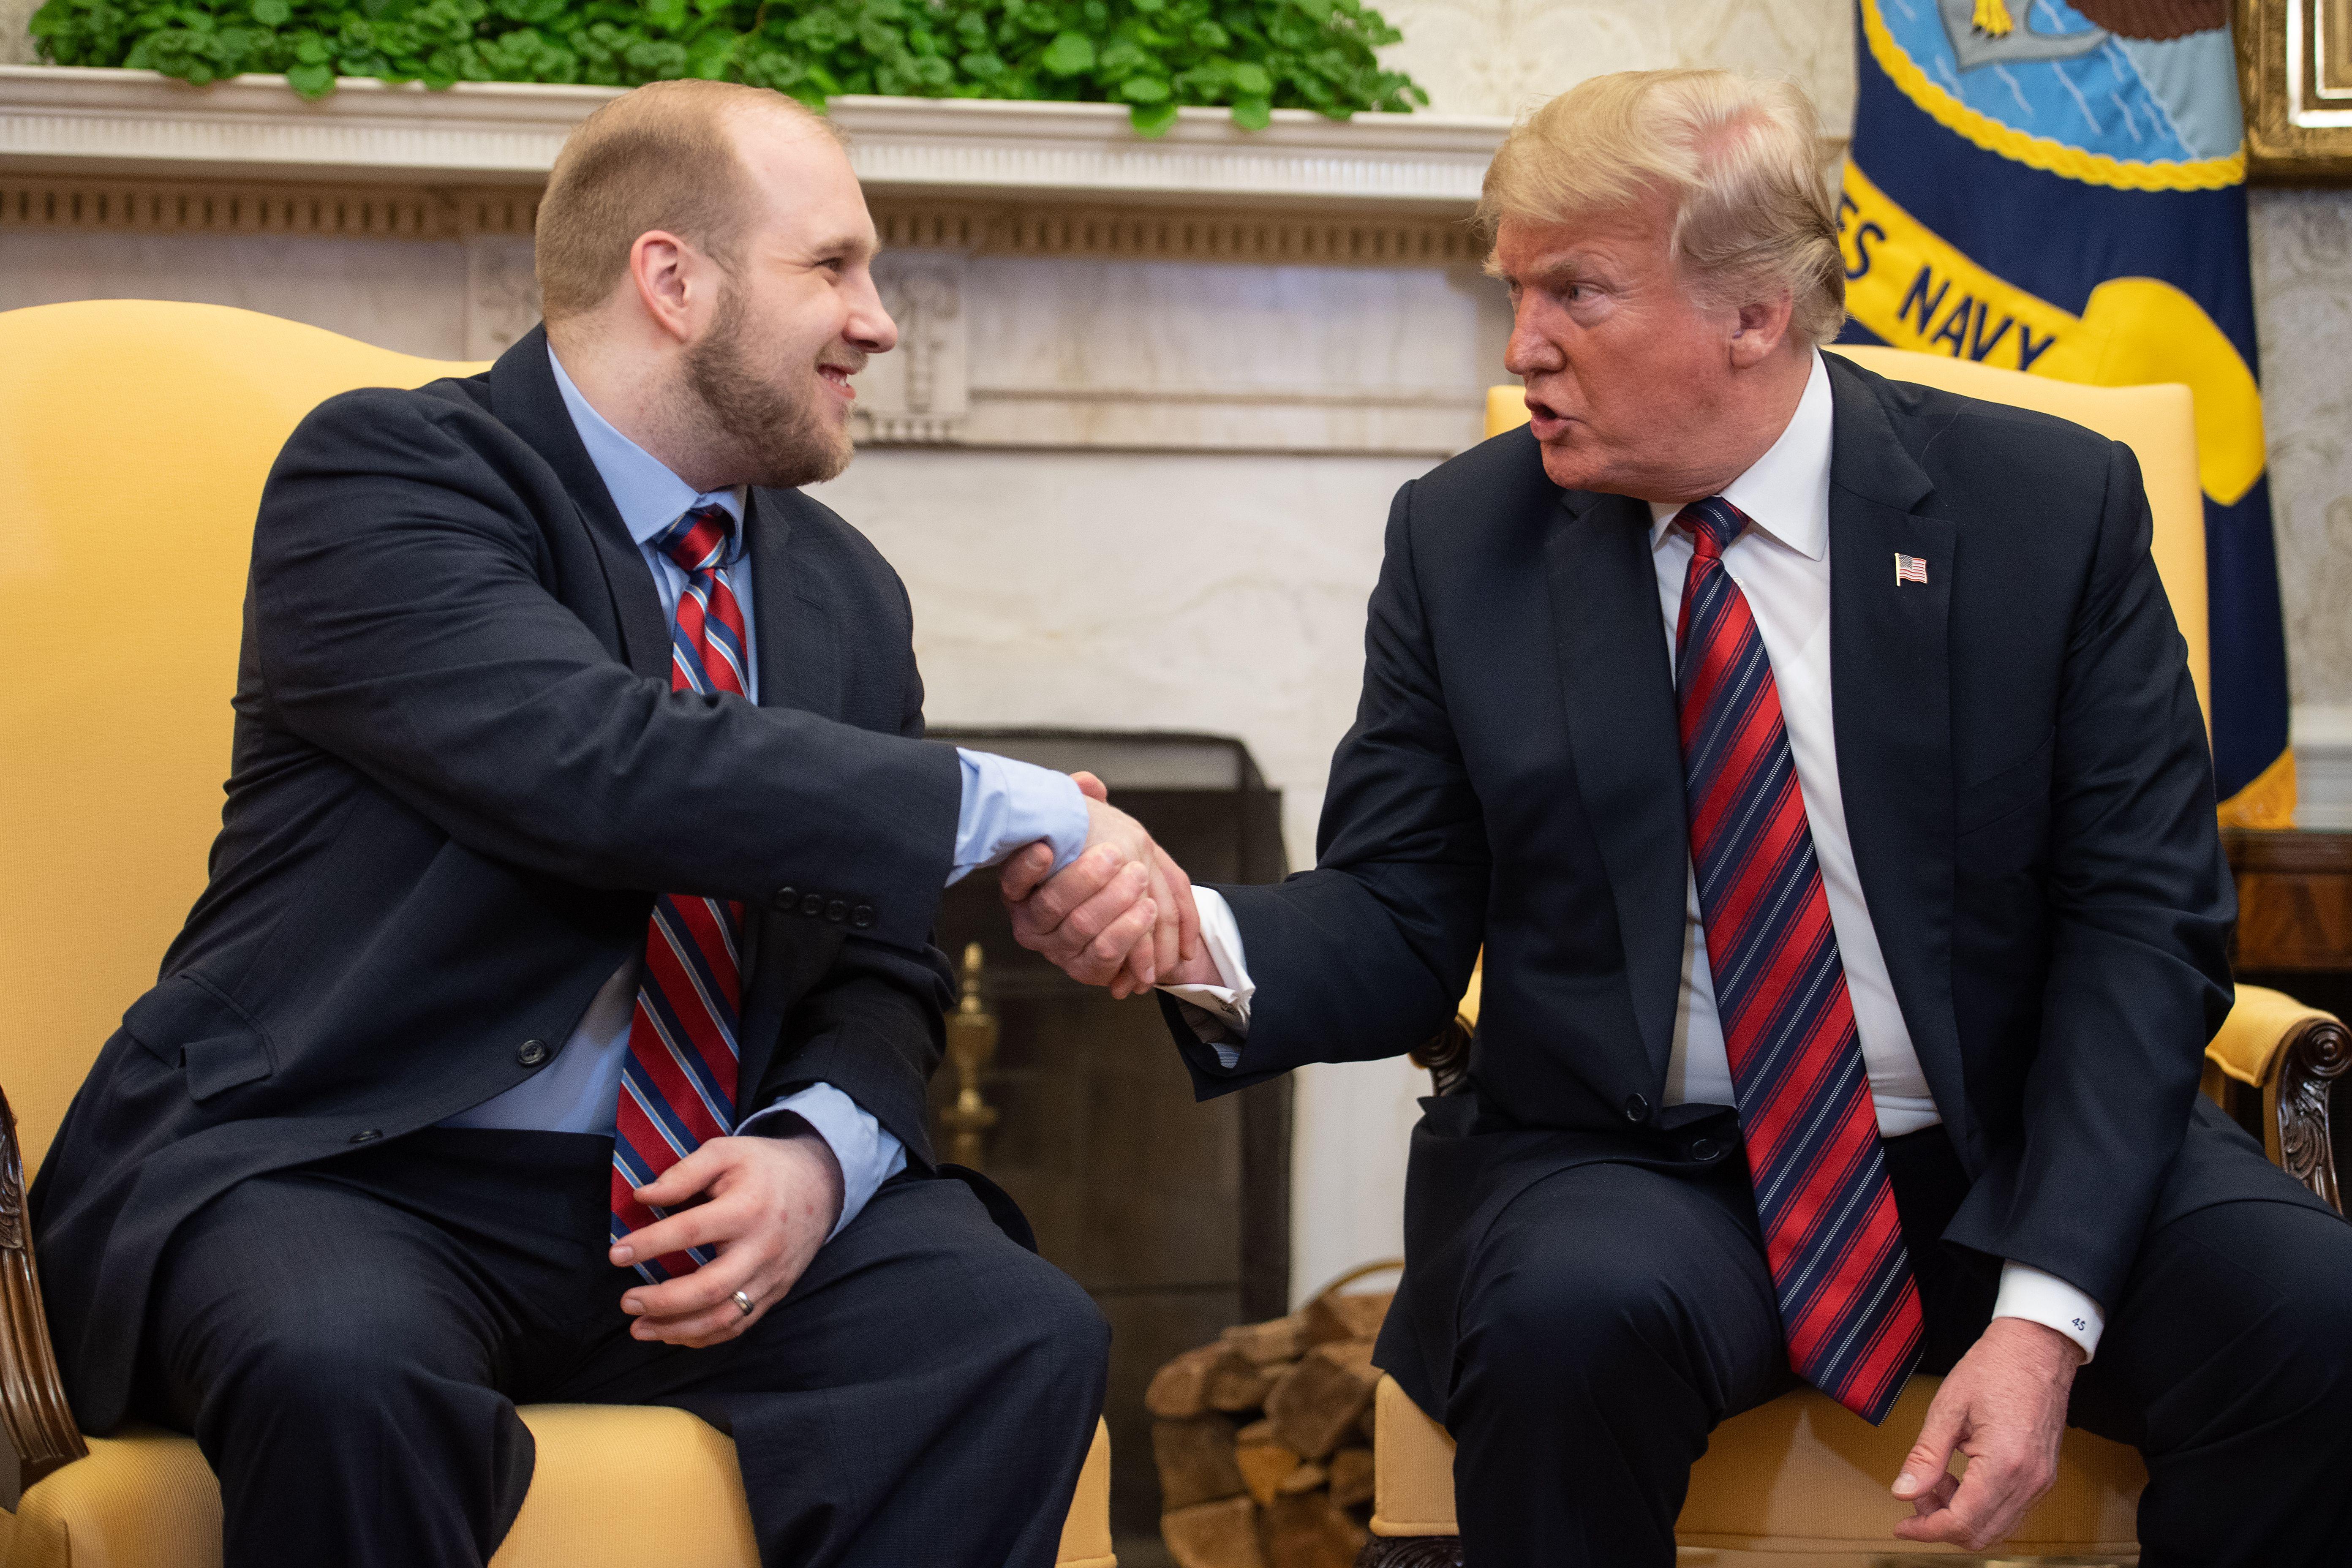 President Donald Trump shakes hands with Joshua Holt, who had been detained in Venezuela for two years, in the Oval Office at the White House in Washington, DC, on May 26, 2018. 